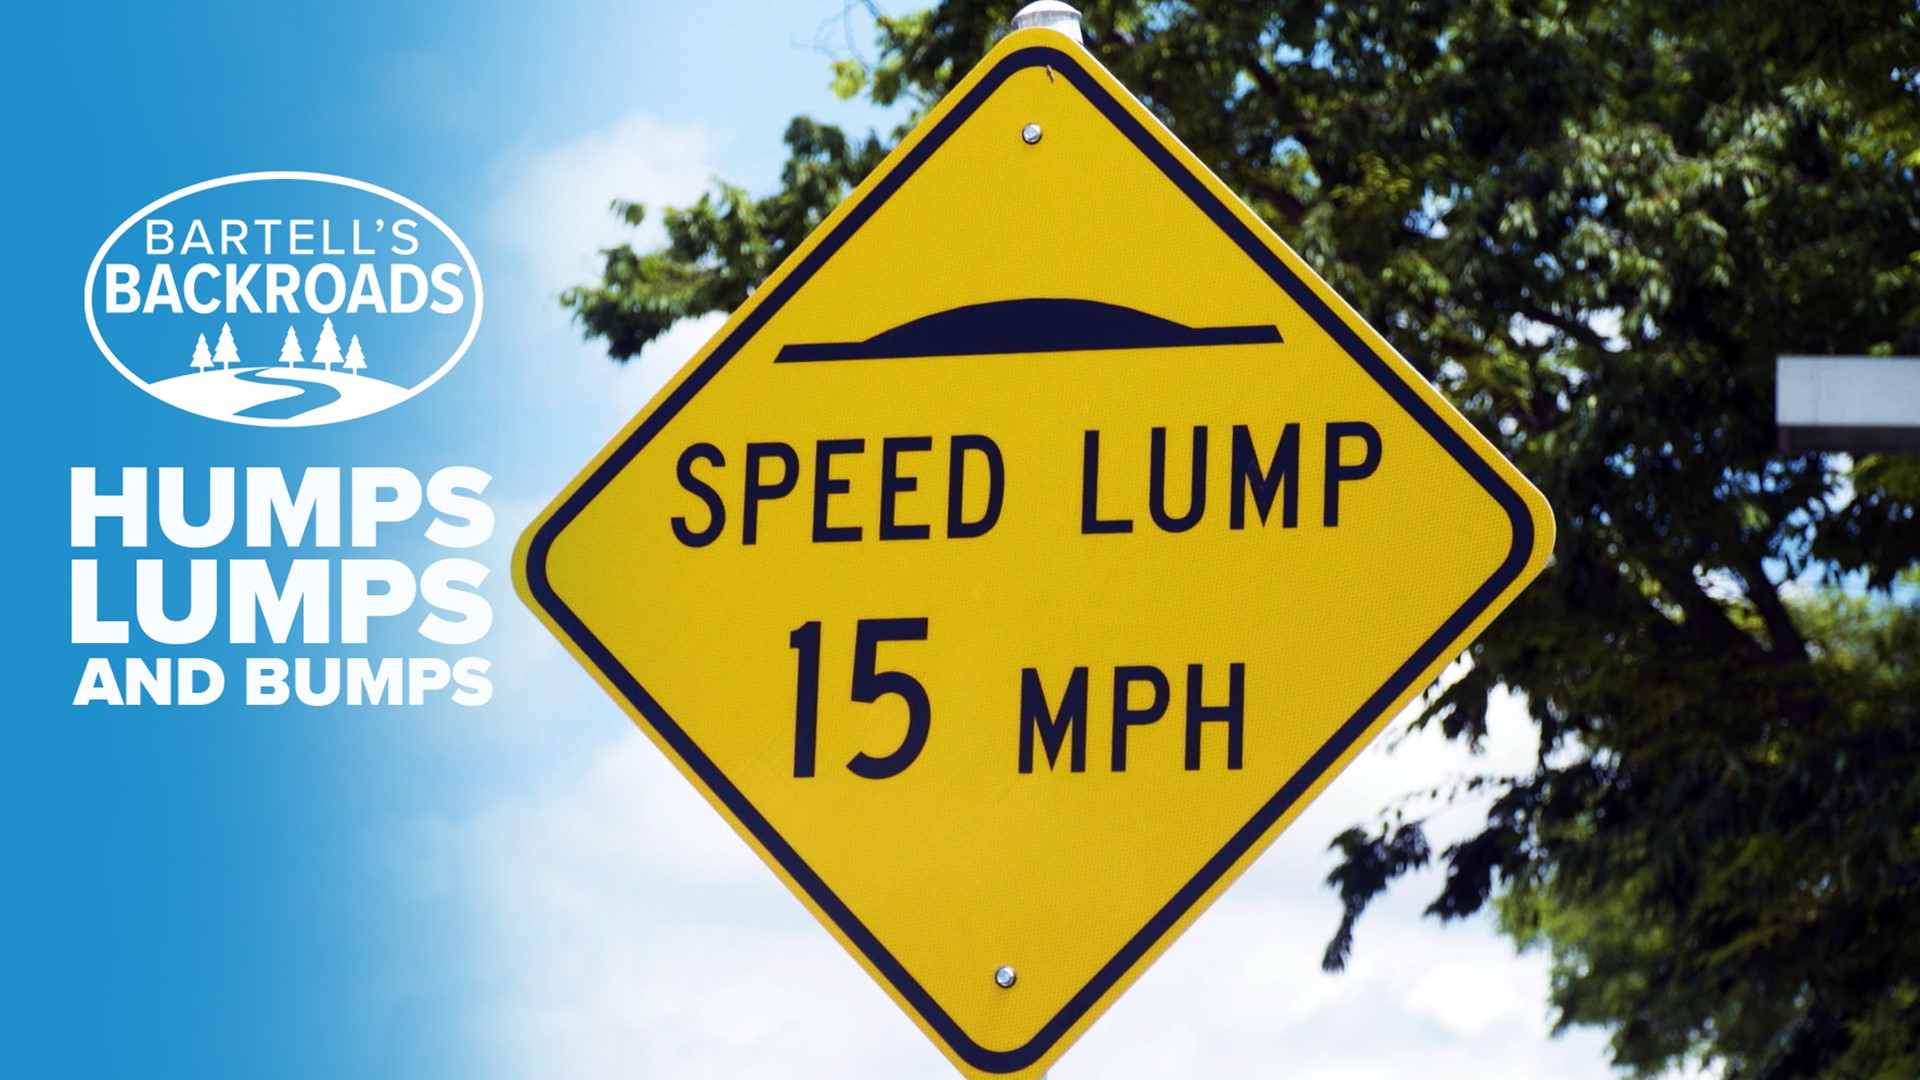 The backroads of Sacramento are covered with several unique kinds of speed-reducing lumps. What's the difference? John Bartell found an expert to explain each one.